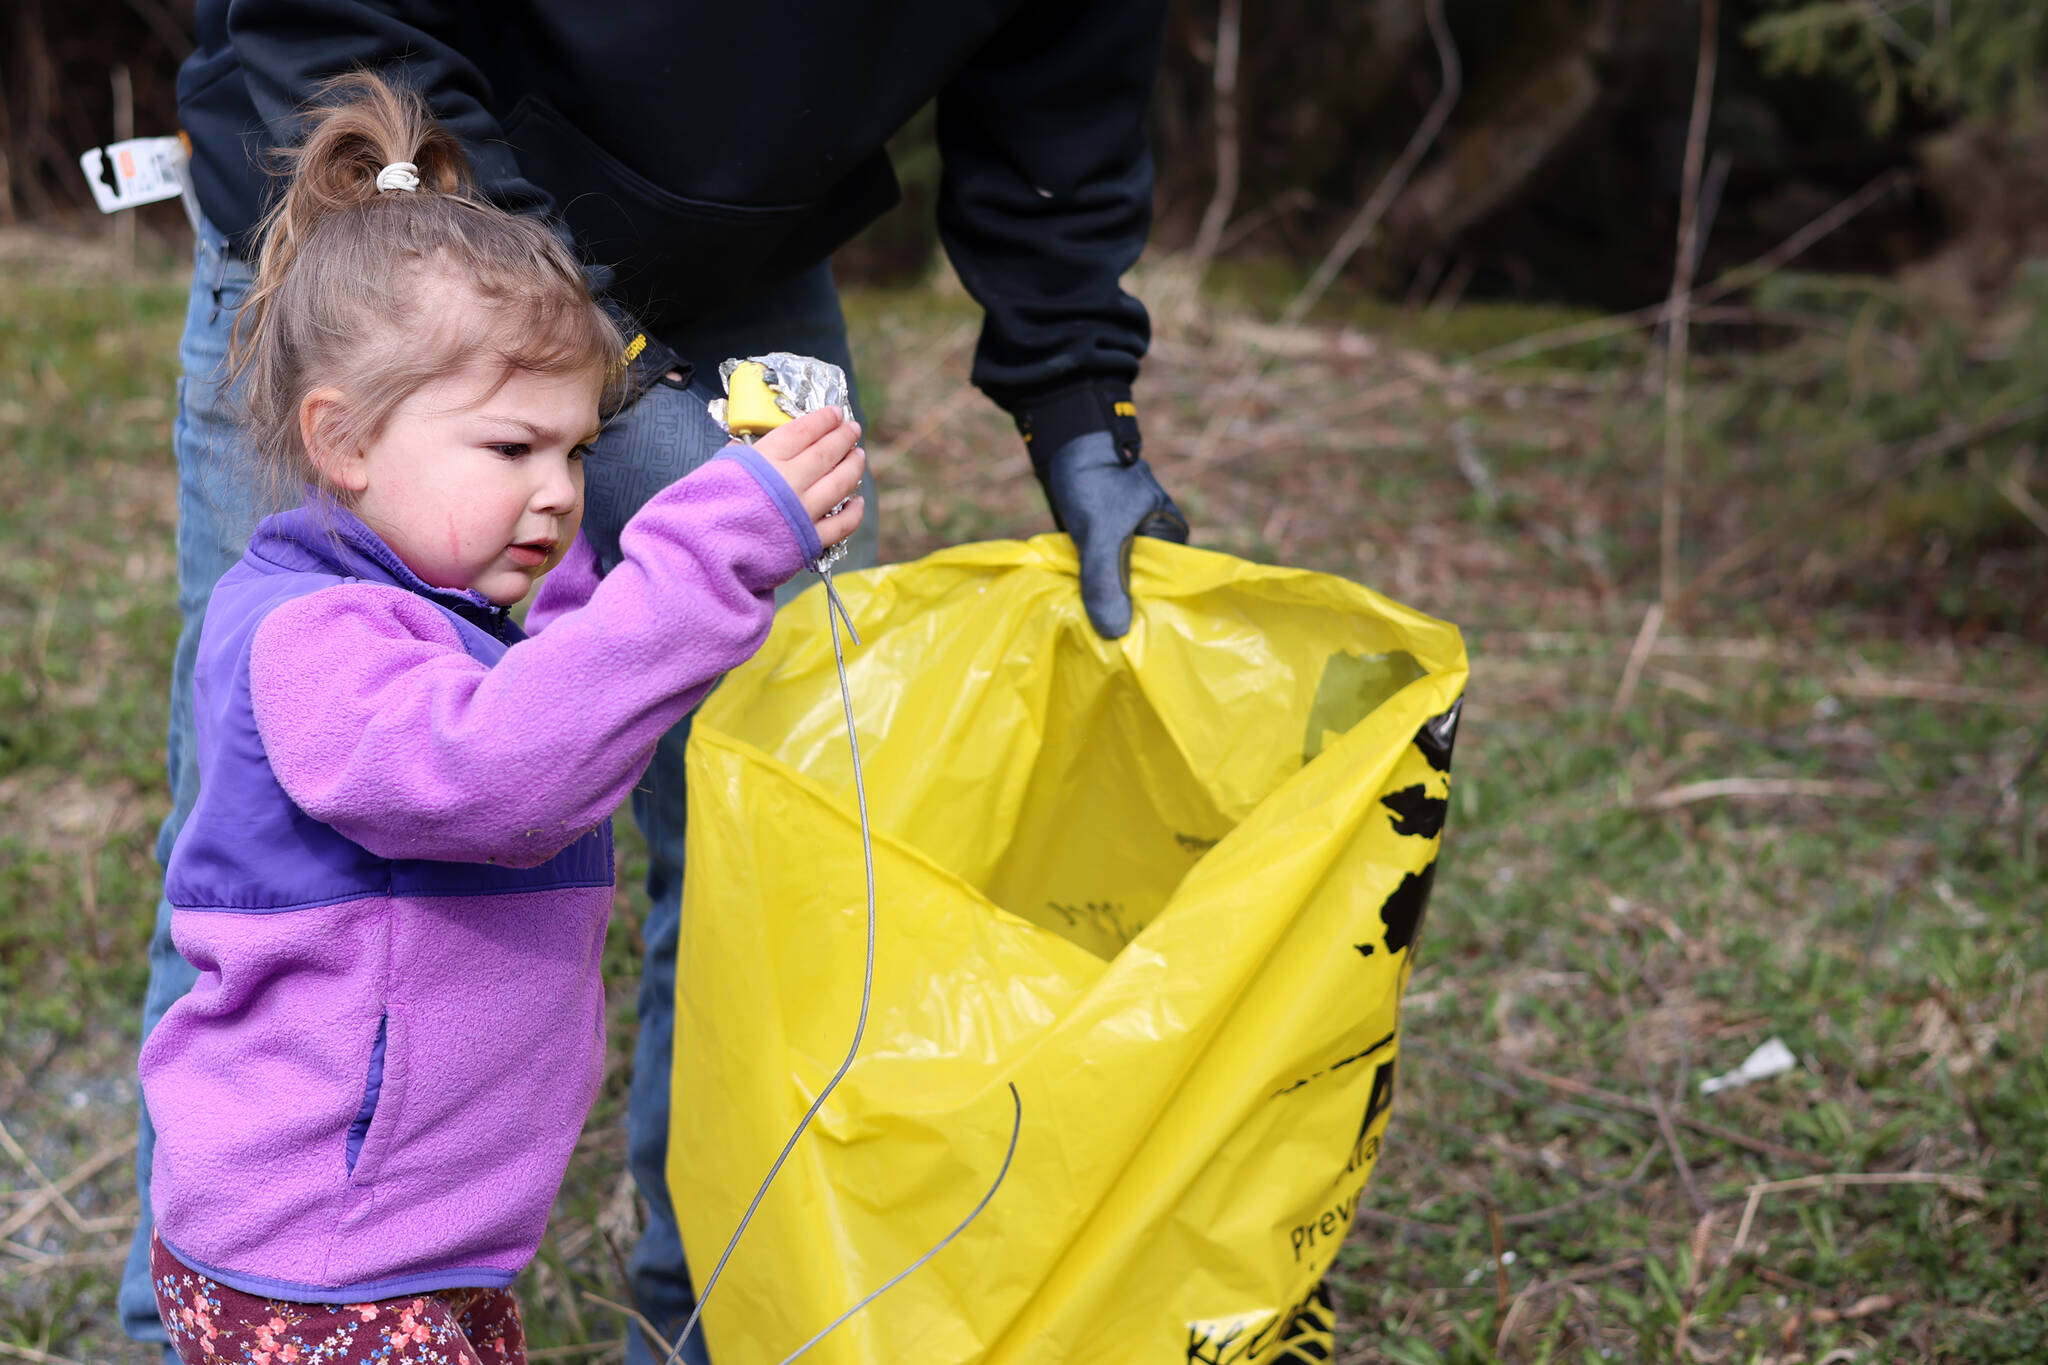 Genevieve Berry, 3, places litter in a trash bag on Earth Day during a communitywide cleanup. (Ben Hohenstatt / Juneau Empire)